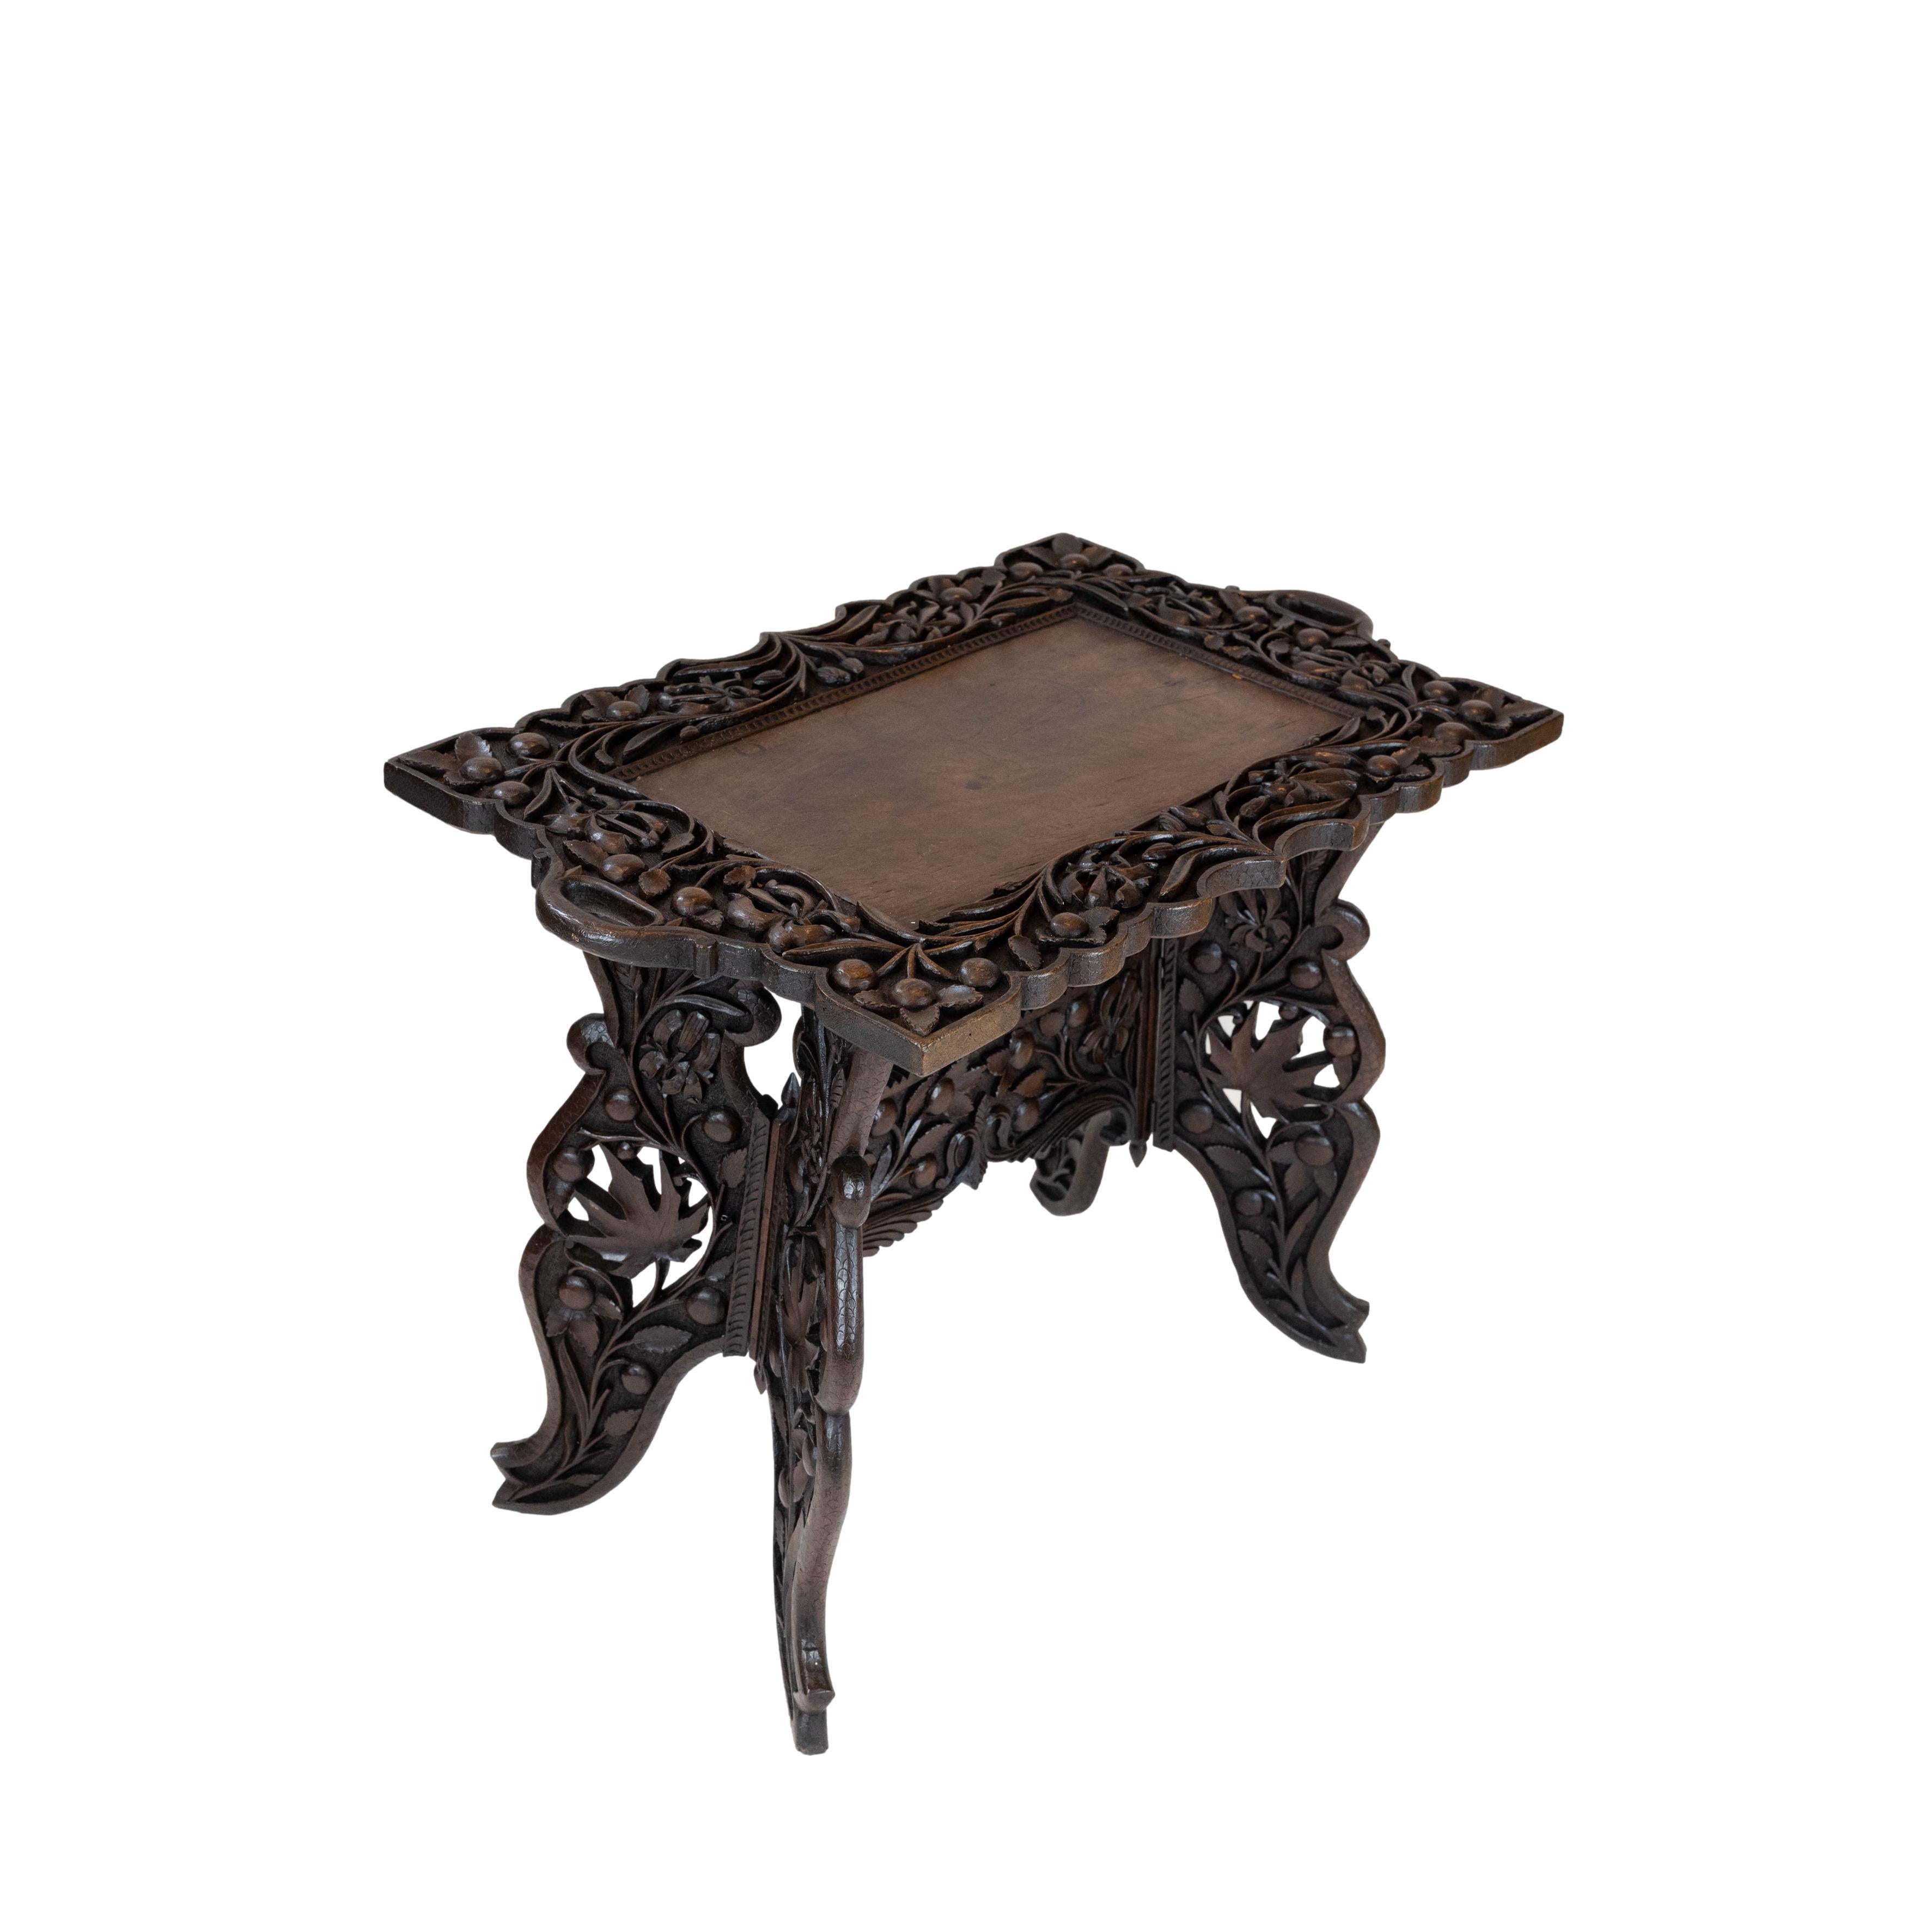 19th Century Elaborately Hand-Carved Solid Walnut Campaign Tray-Top Table, English, ca. 1890 For Sale